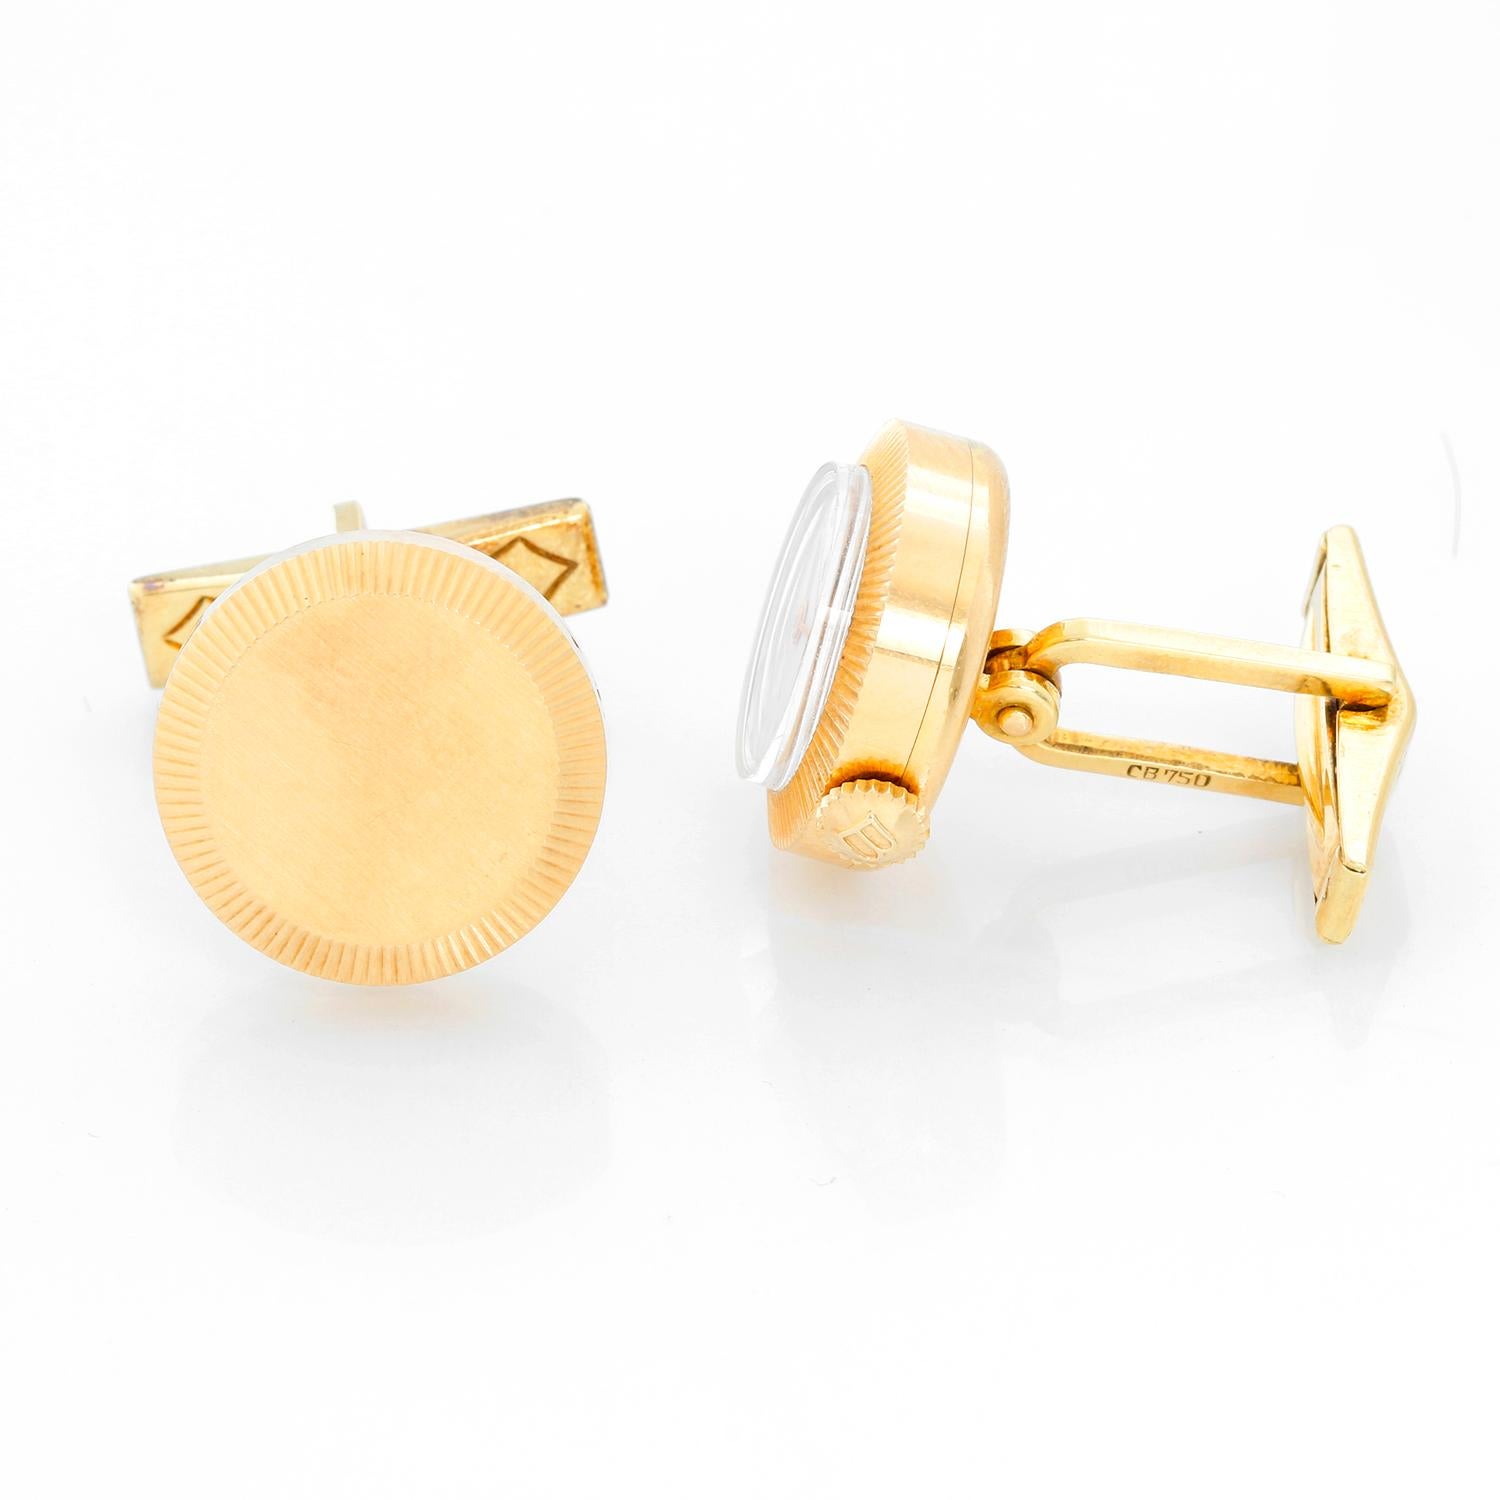 Carl F. Bucherer 18K Yellow Gold Cufflinks Watch - 18K Yellow gold ( 18 mm ). White dial with stick hour markers . Unusual 18k yellow gold cufflinks by Swiss watchmaker Carl Bucherer, in which one of the links is a working watch. Bucherer was known